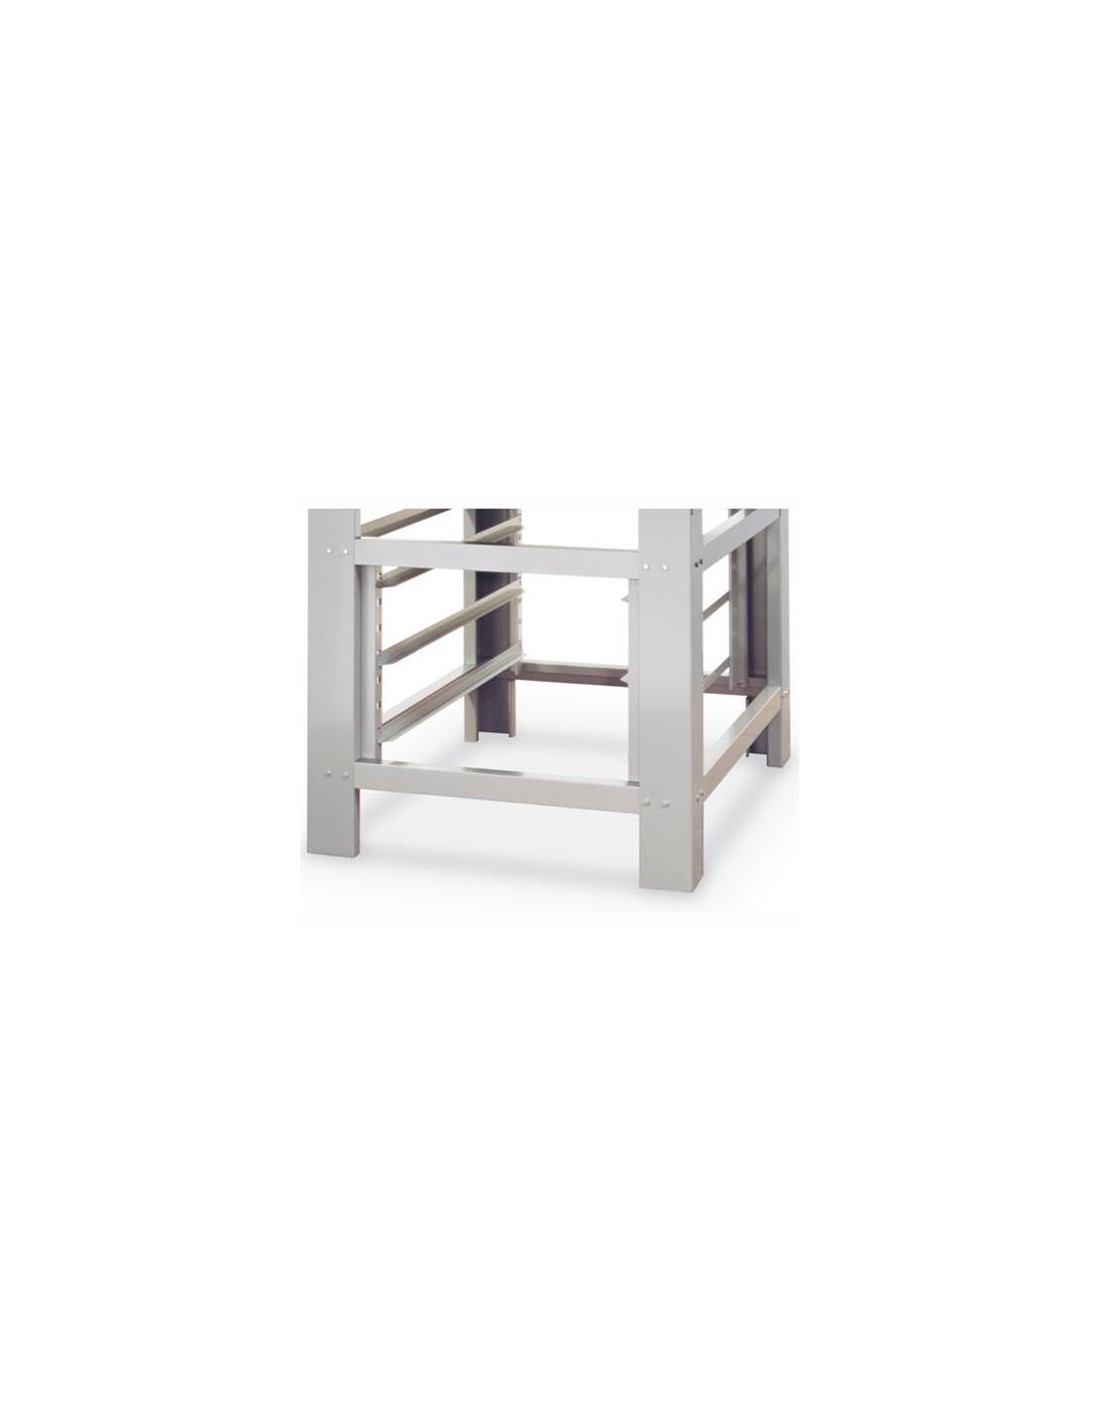 PASTFOOD oven support - Height 70 cm